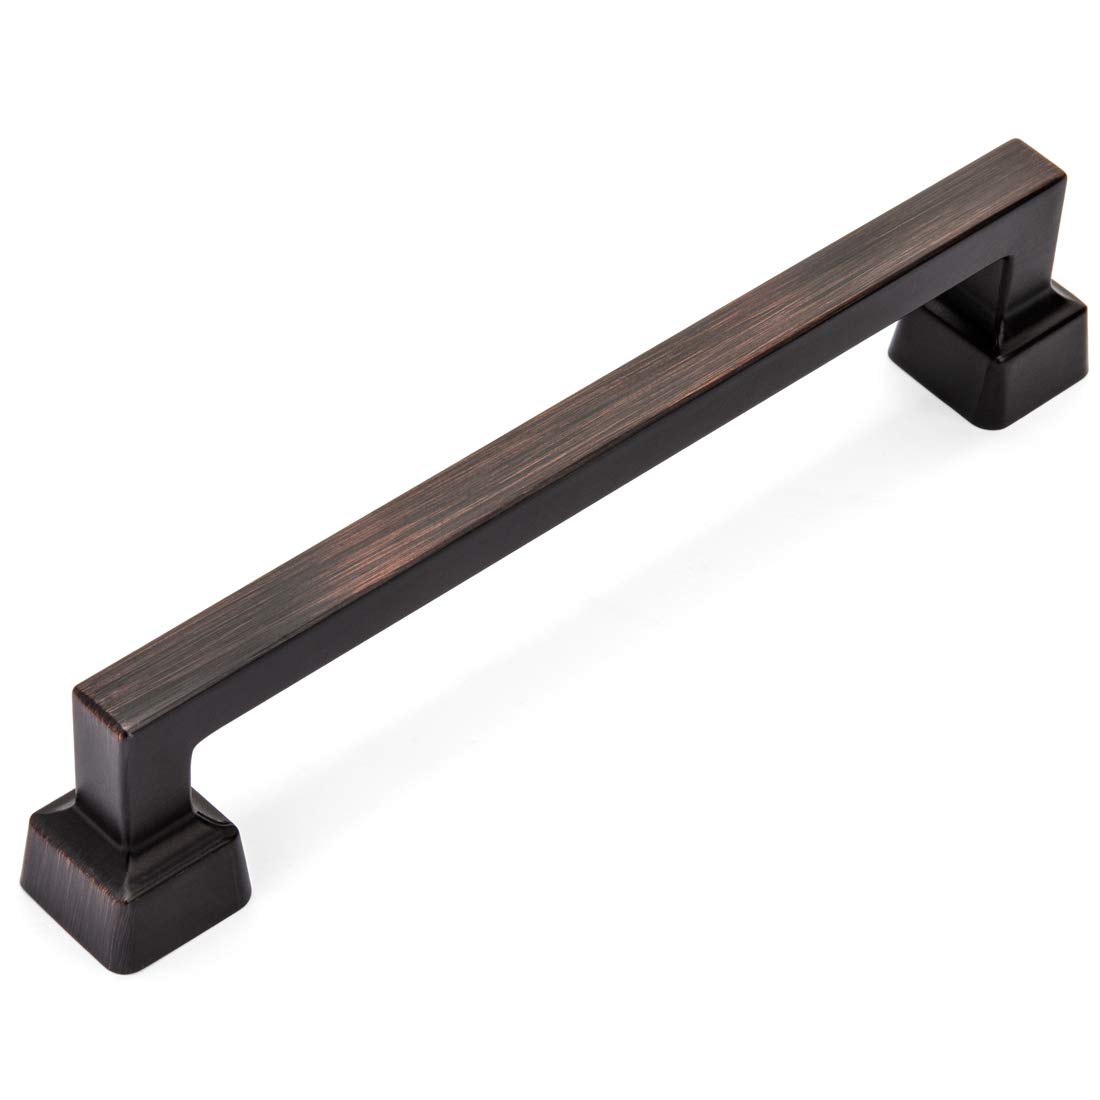 Cosmas 10 Pack 1481-128ORB Oil Rubbed Bronze Contemporary Cabinet Hardware Handle Pull - 5" Inch (128mm) Hole Centers